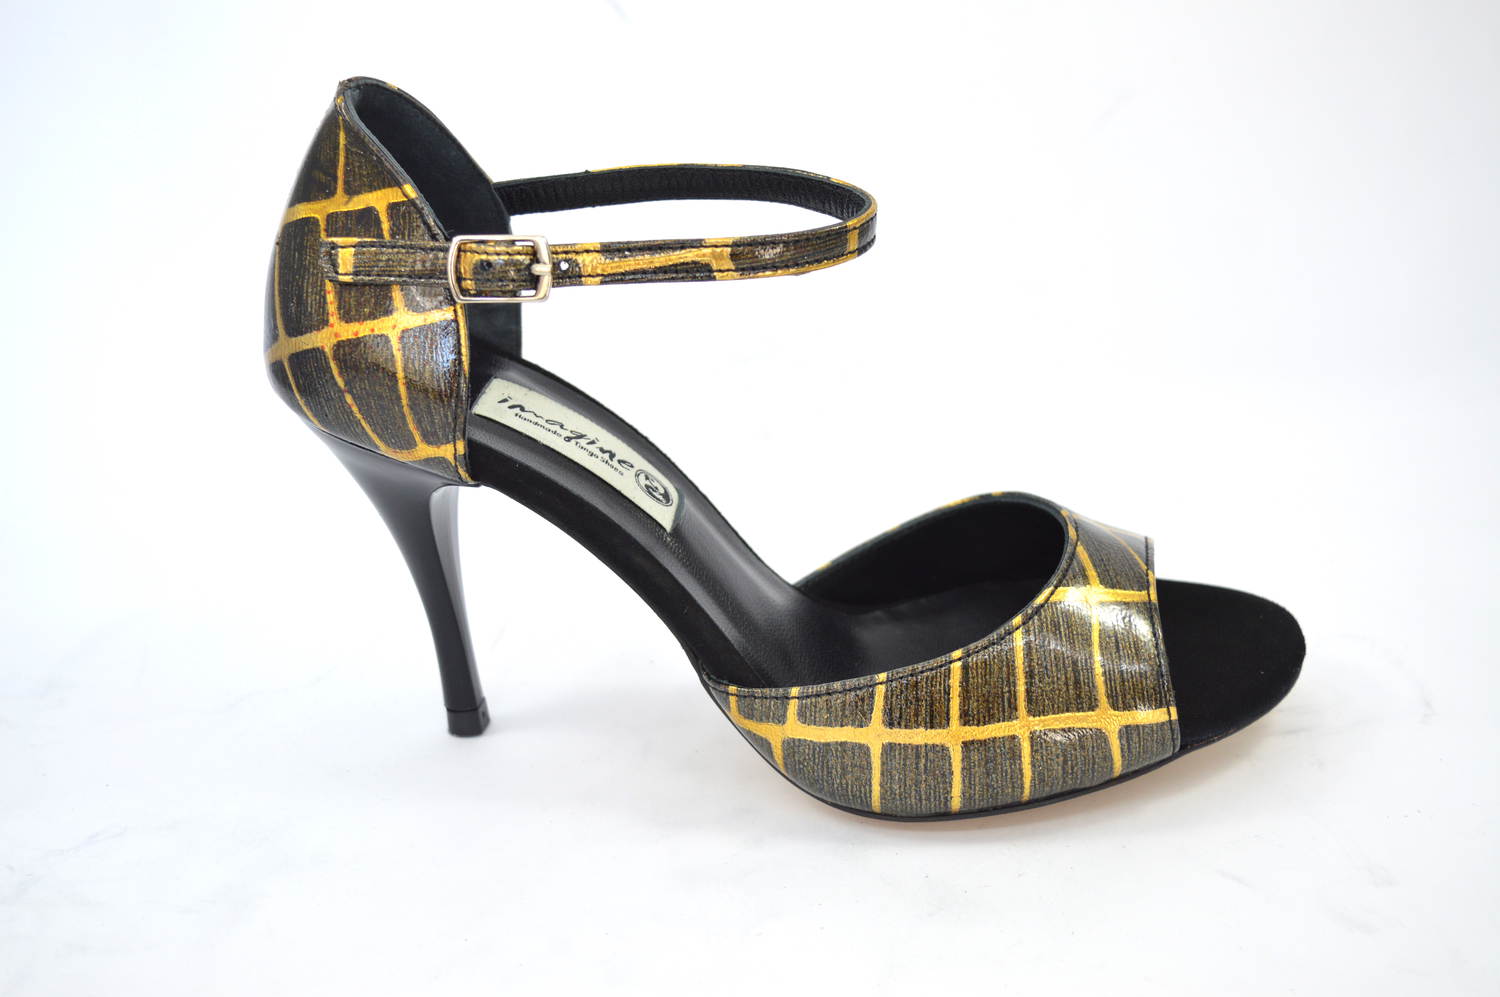 Women Argentine Tango Dance Shoes, in special gold-brown leather and black suede leather